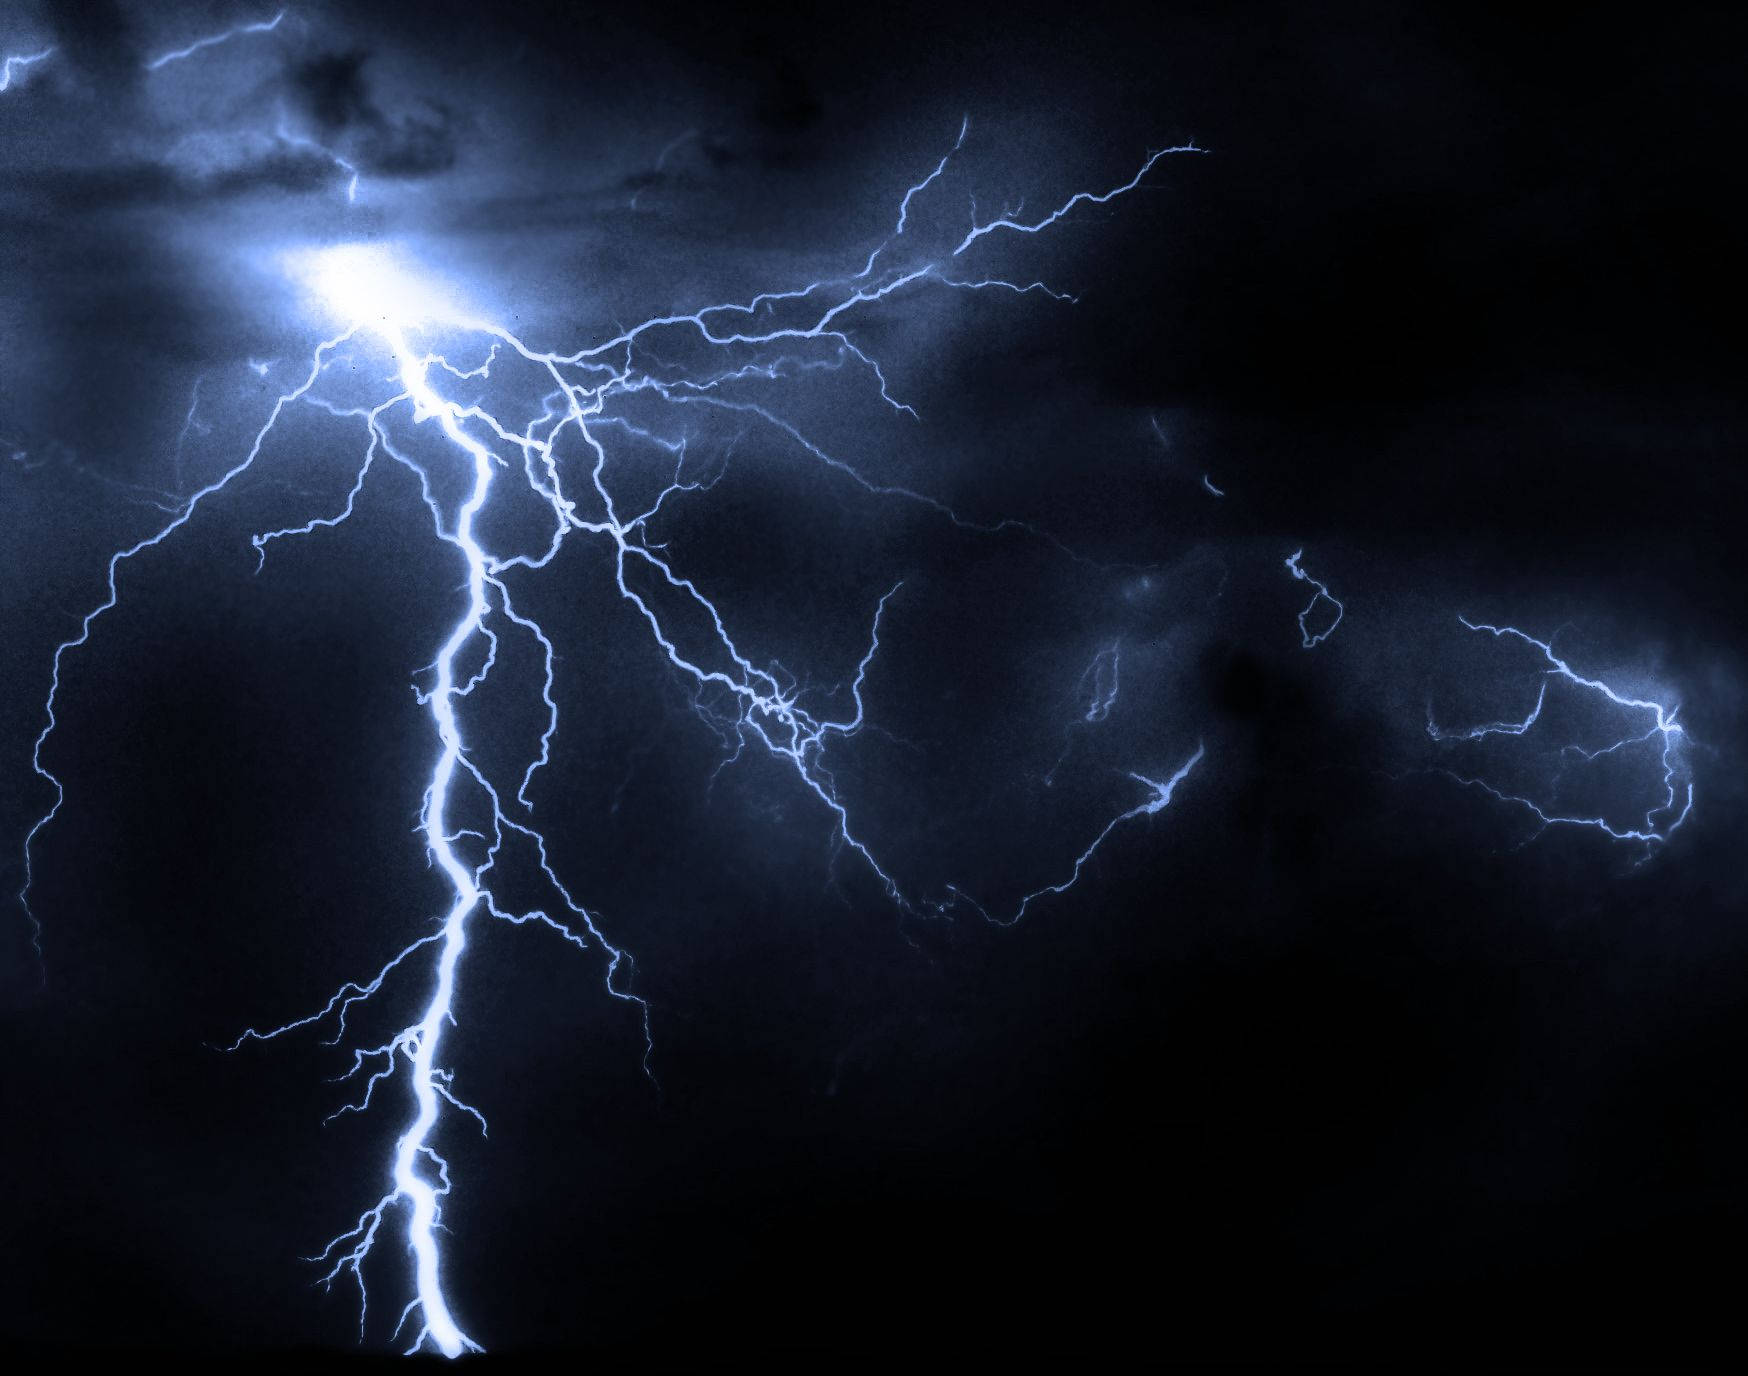 Powerful Bolt of Lightning During a Stormy Night Wallpaper